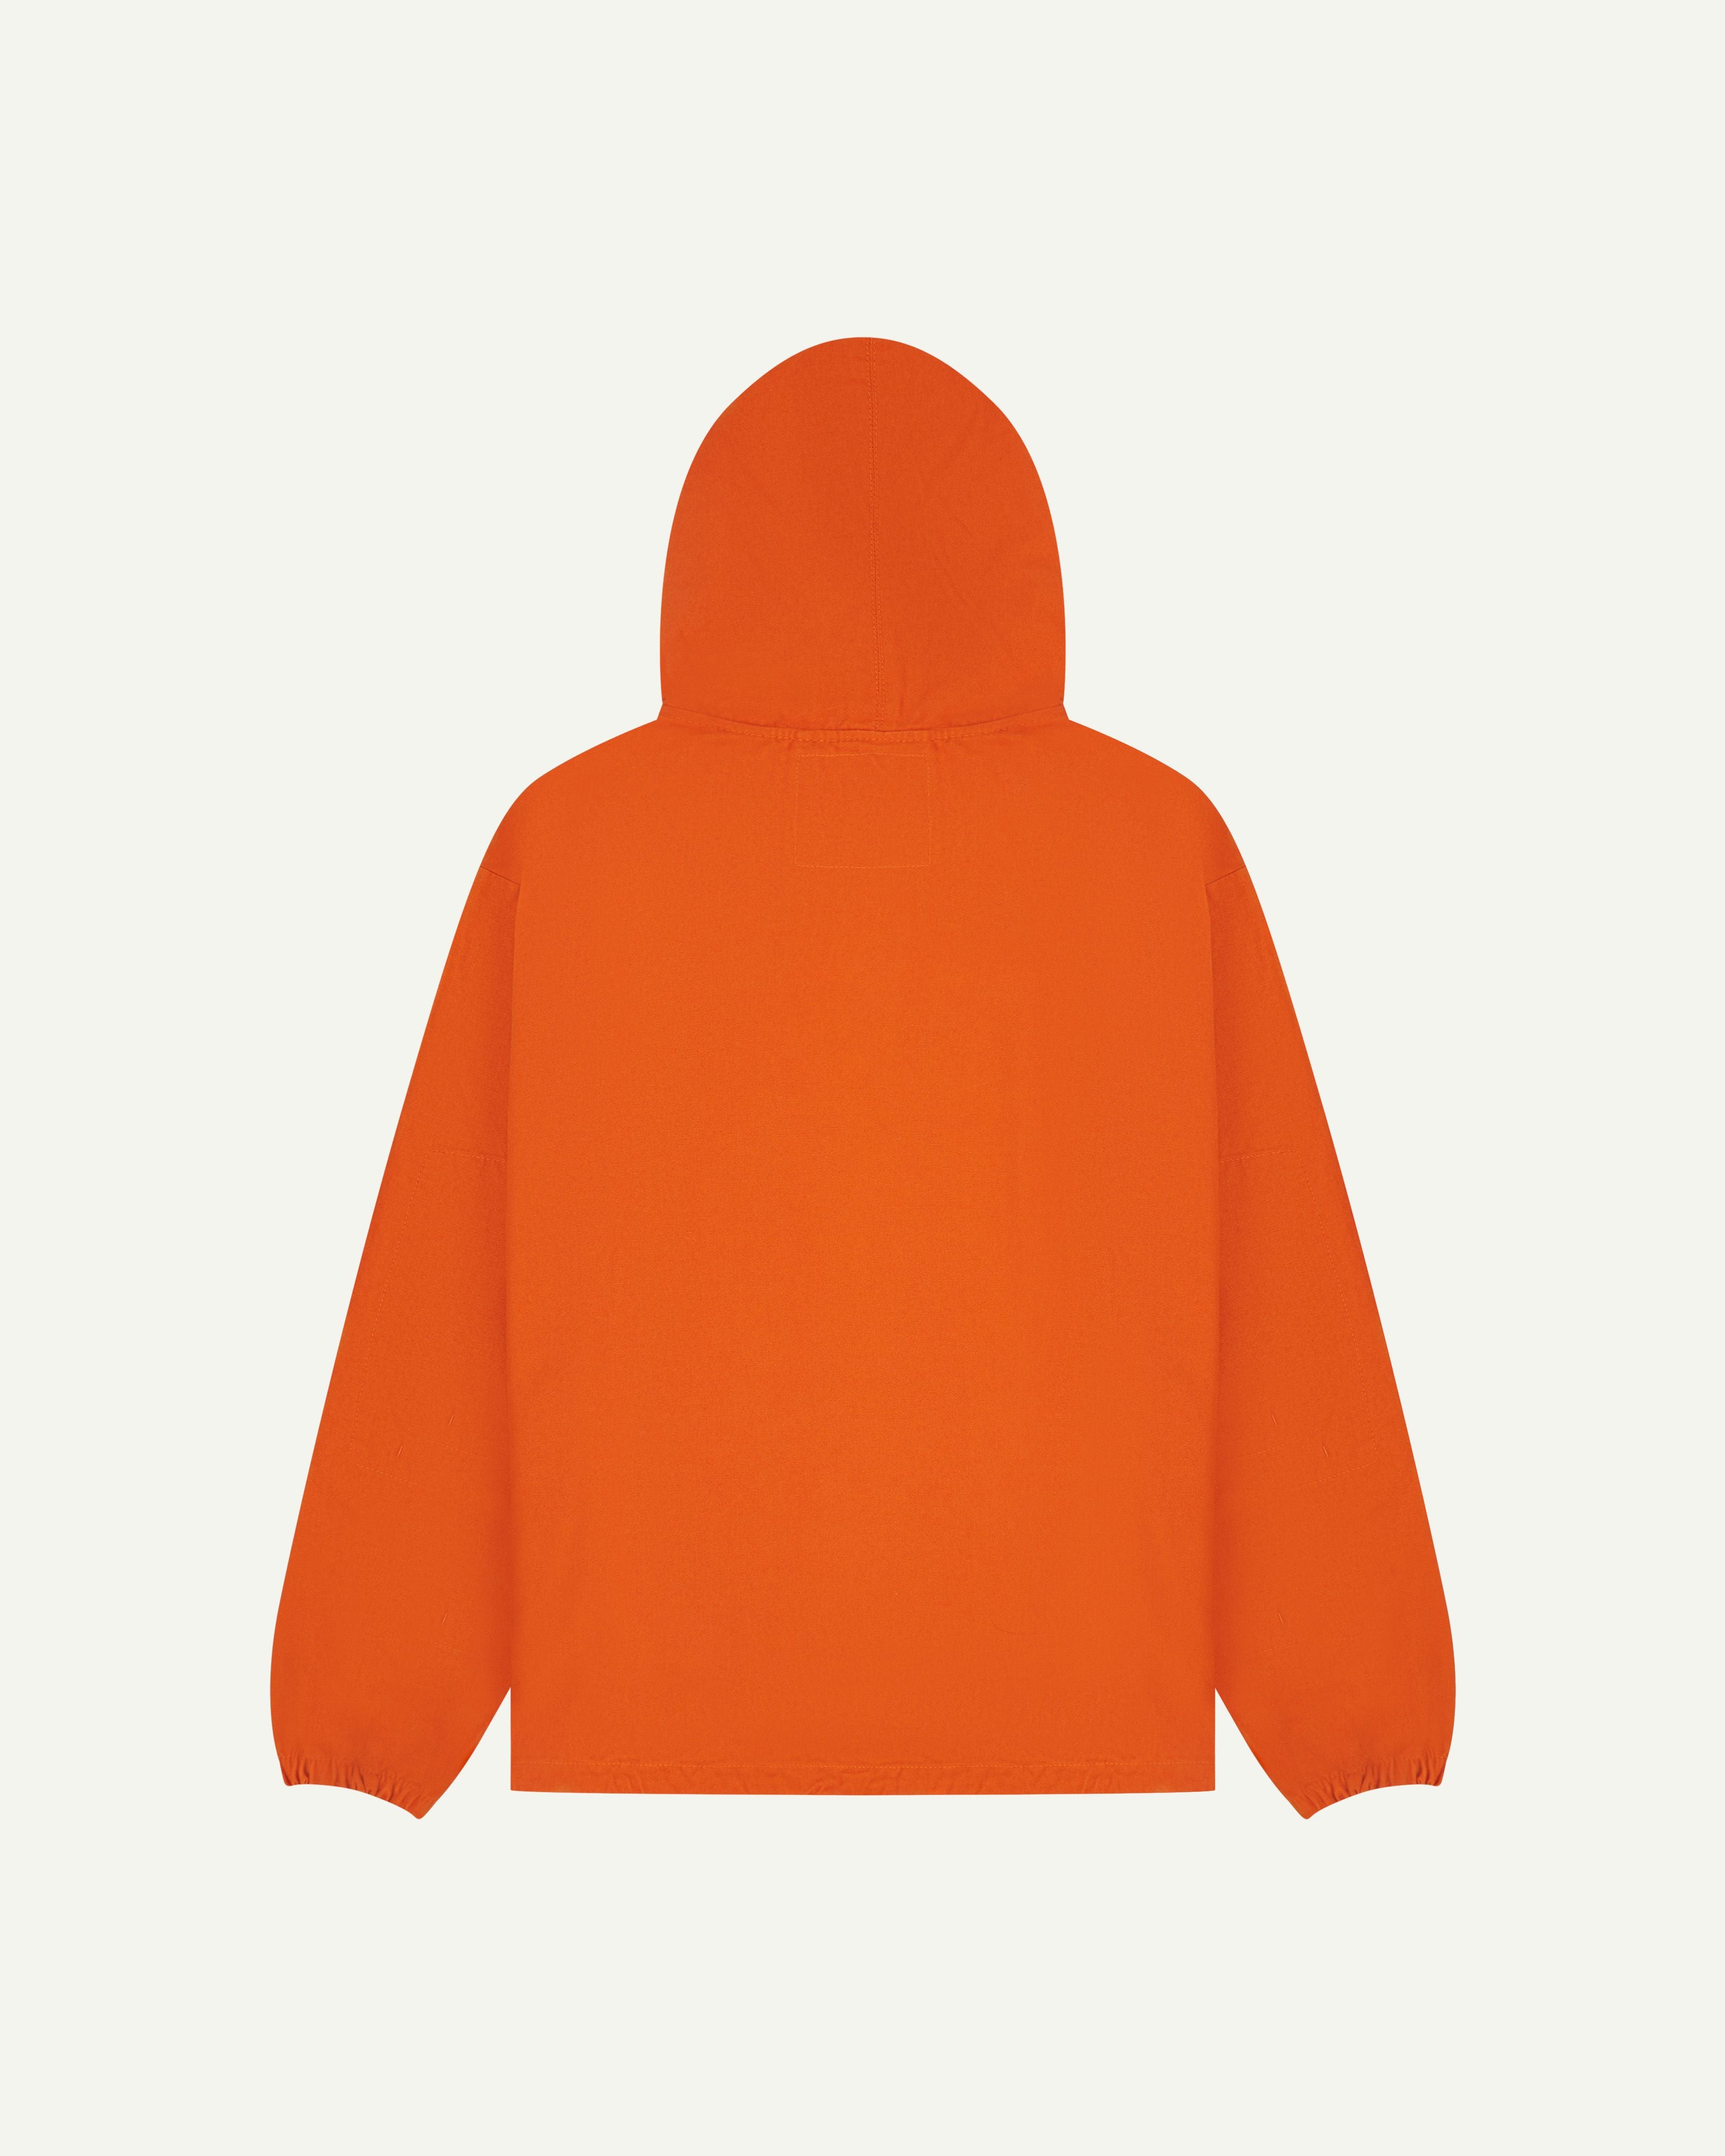 Flat back view of orange coloured men's smock from Uskees